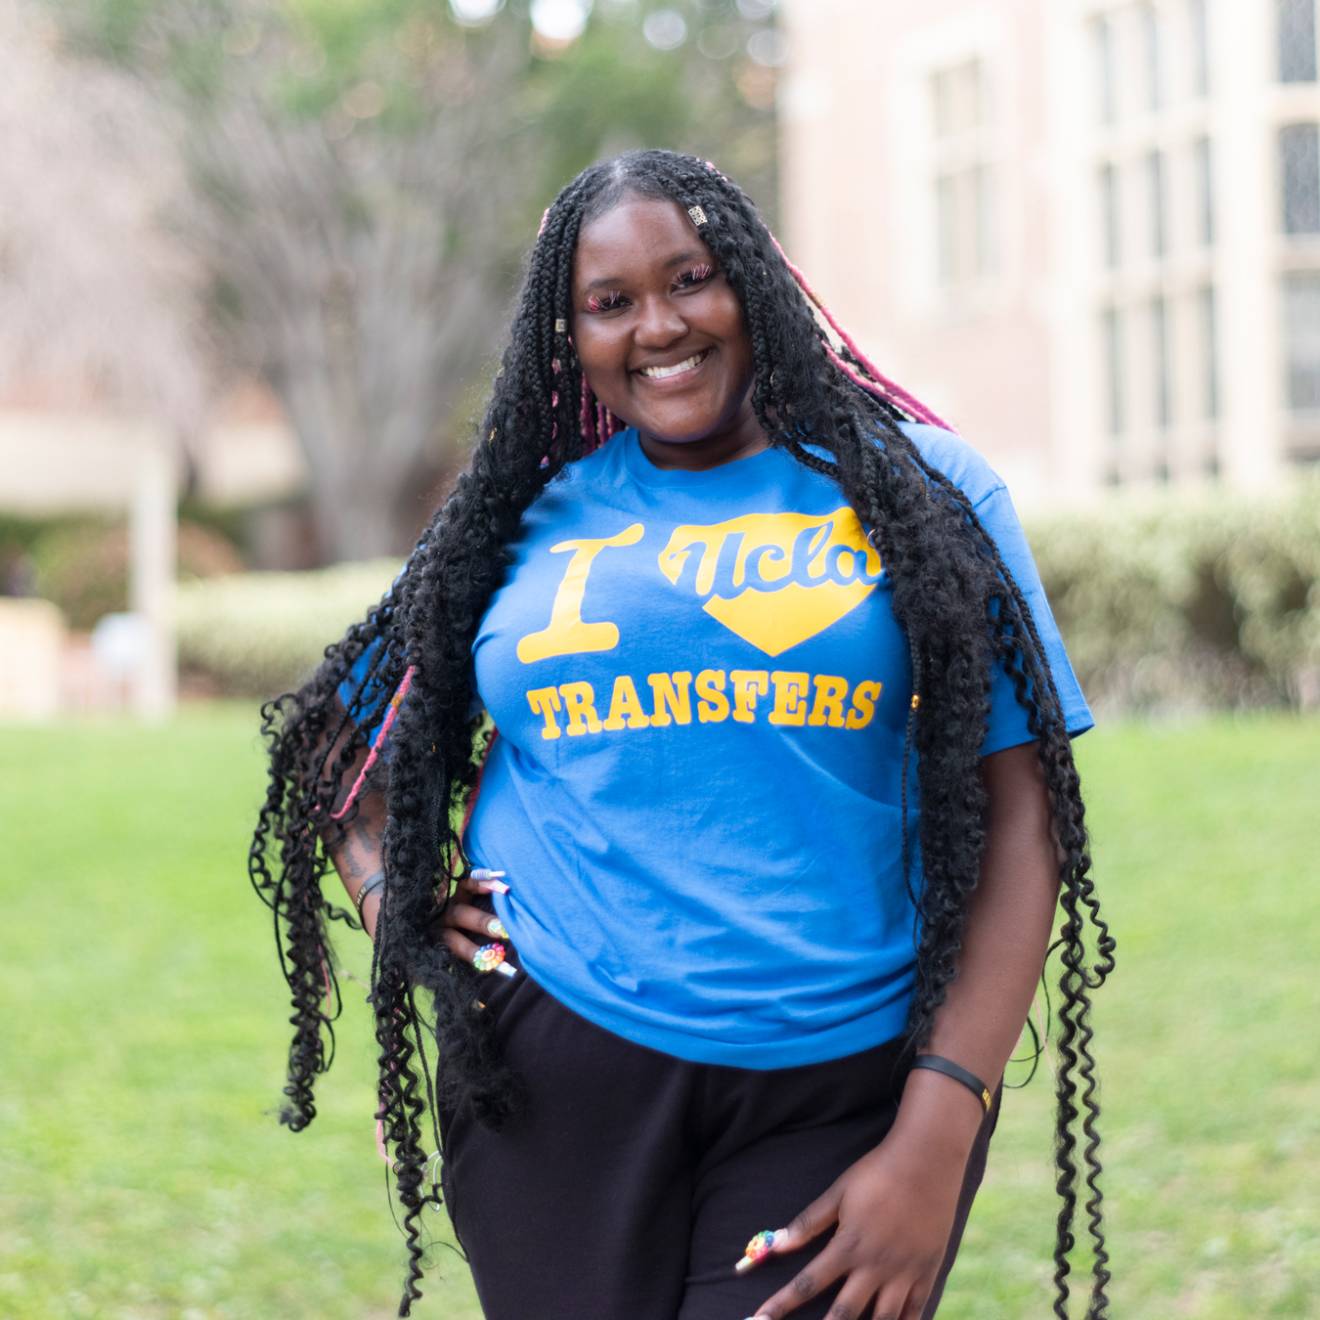 Black woman smiling with a T-shirt that says I UCLA-heart Transfers